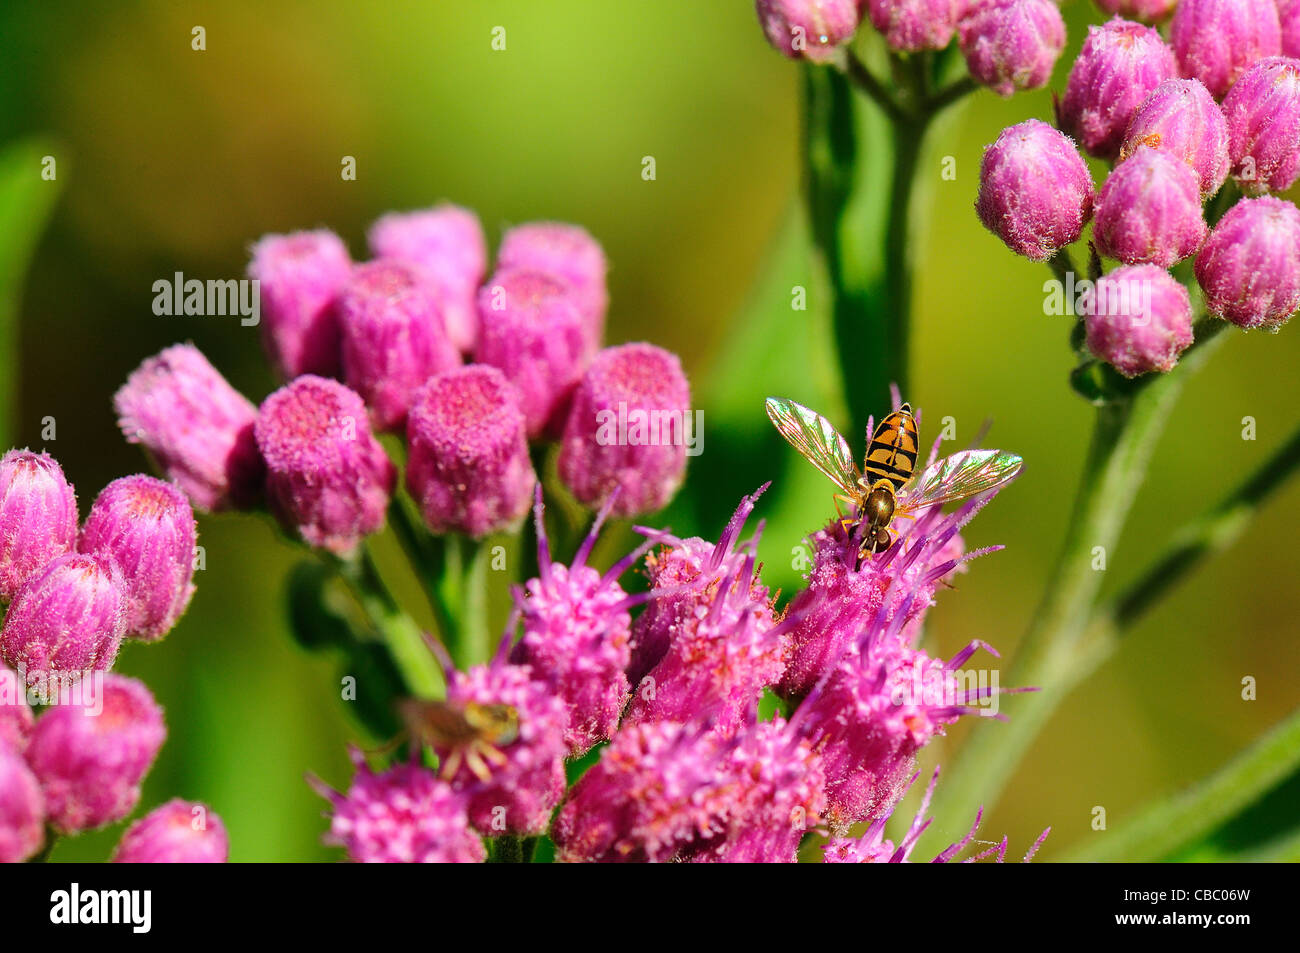 Syrphid Fly Stock Photo